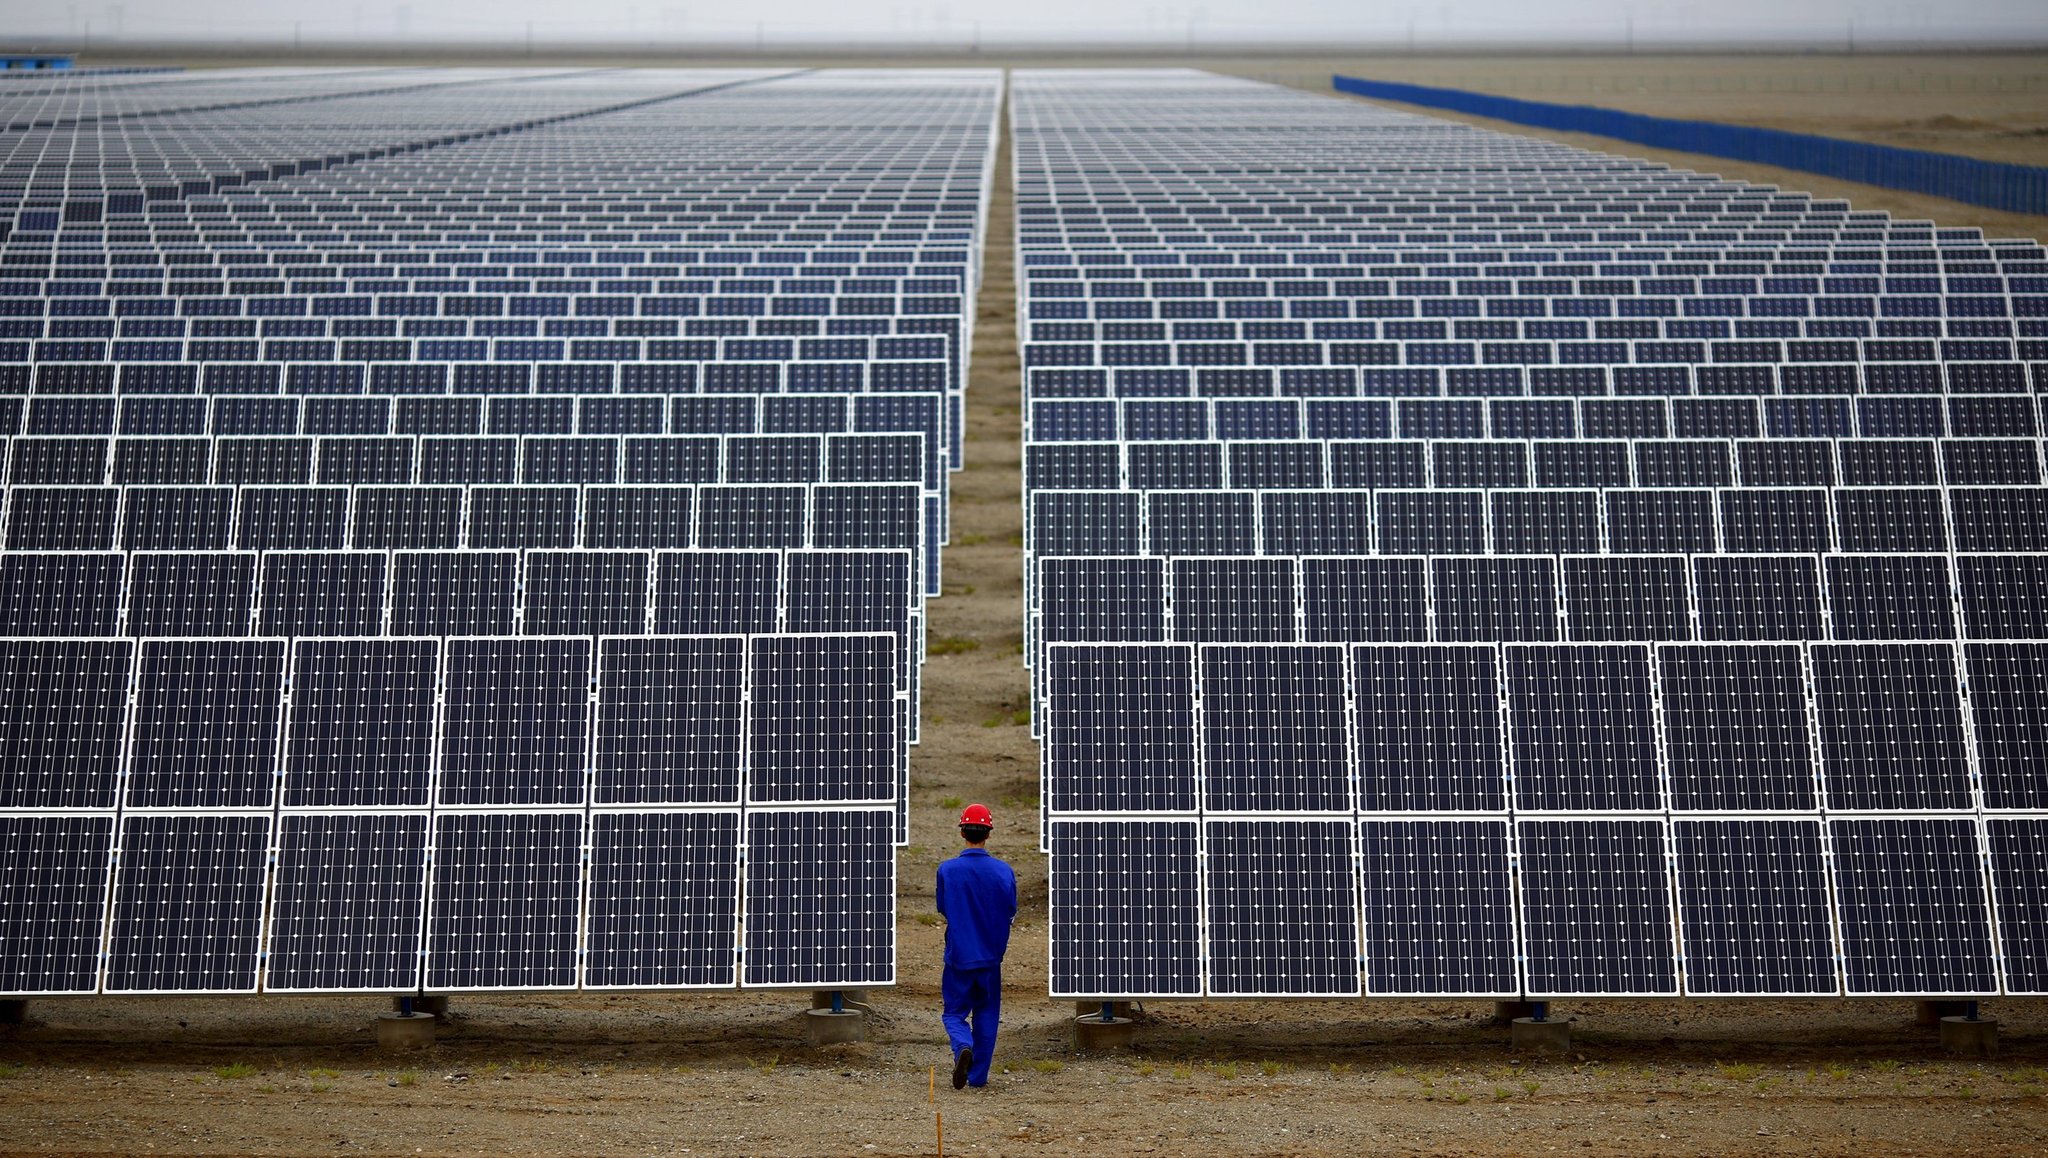 Solar panels in Gansu Province, China. The Chinese government wants to generate 150 to 200 gigawatts of electricity using solar power by 2020, potentially quadrupling the previous target. Carlos Barria/Reuters